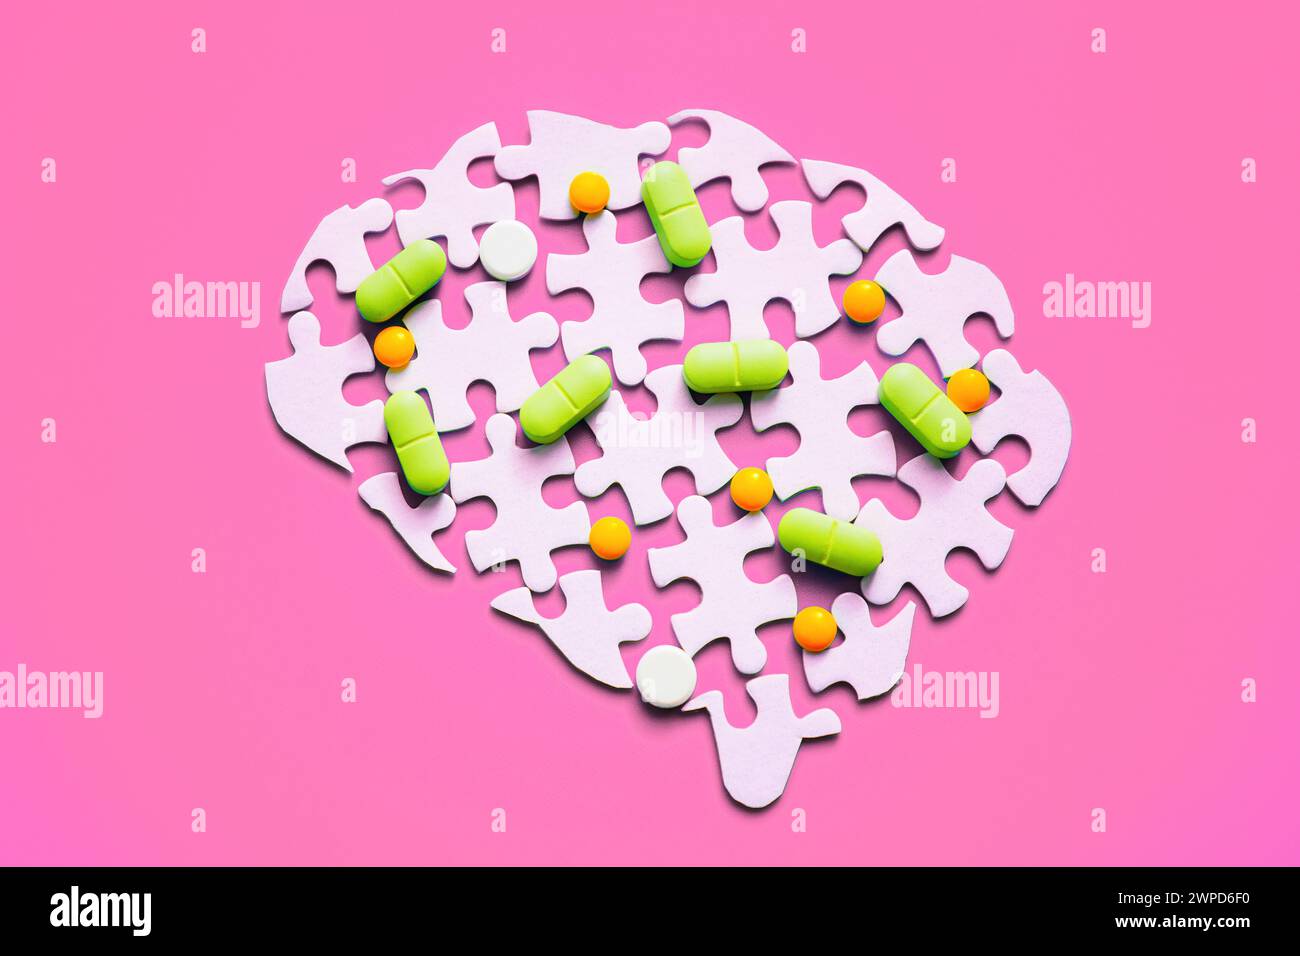 Colorful pills scattered on a disassembled brain puzzle isolated on pink backdrop. Mental health and medication concept. Stock Photo